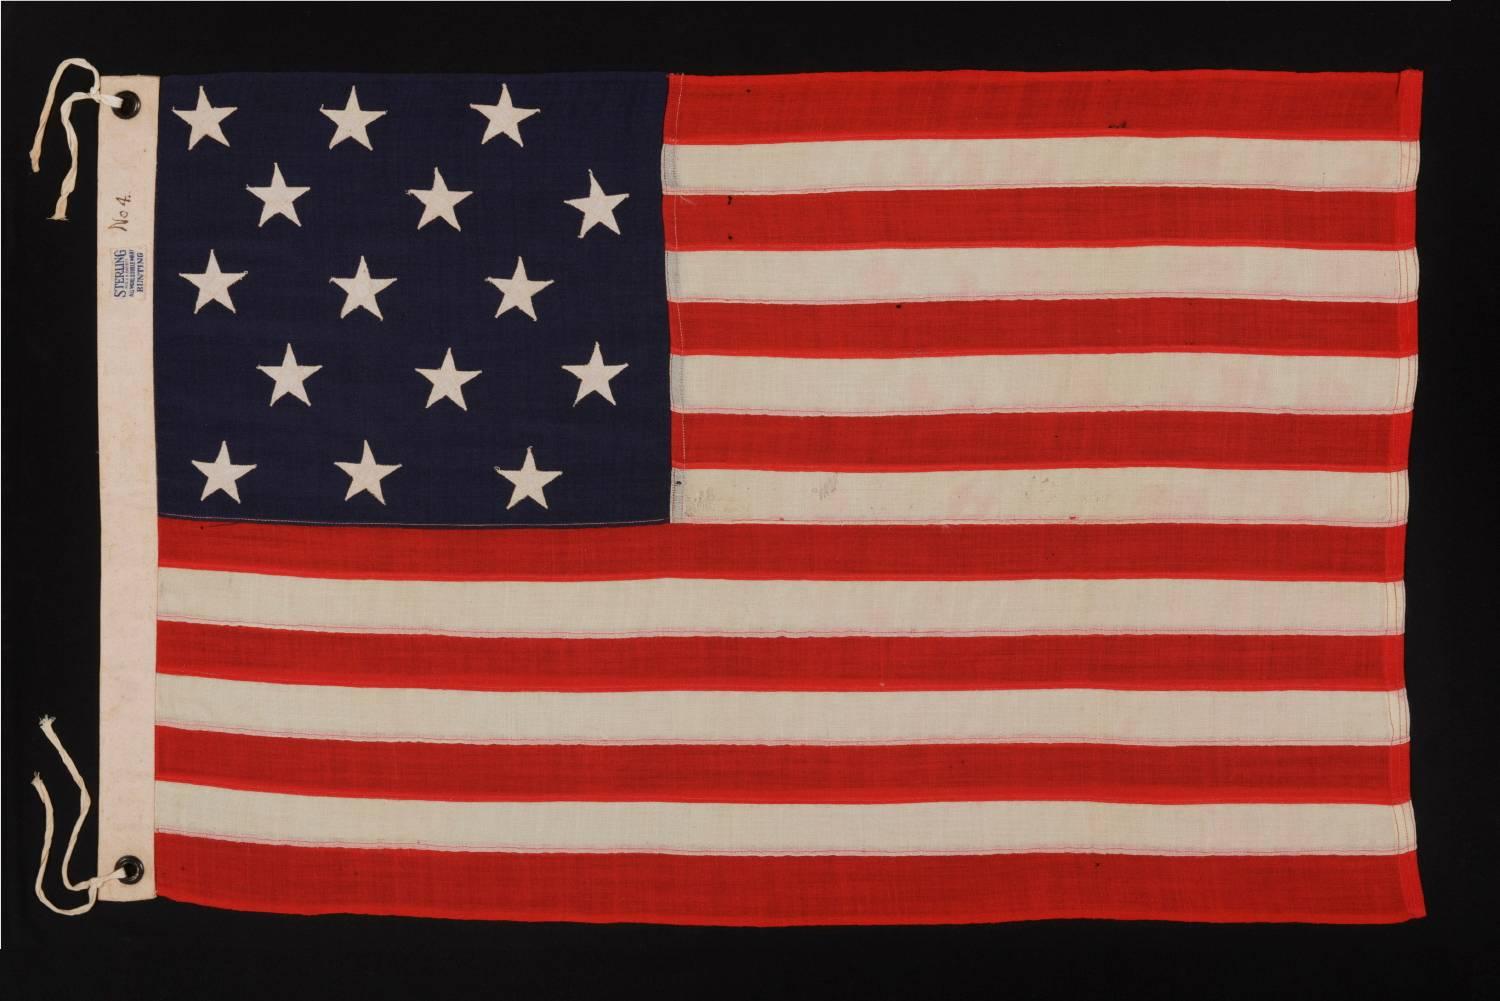 15 STARS AND 15 STRIPES, A COPY OF THE STAR SPANGLED BANNER, THE FAMOUS FLAG ON WHICH FRANCIS SCOTT KEY GAZED IN BALTIMORE HARBOR WHILE WRITING THE WORDS TO THE SONG OF THE SAME NAME; THIS EXAMPLE MADE BY ANNIN & COMPANY IN NEW YORK CITY, CA